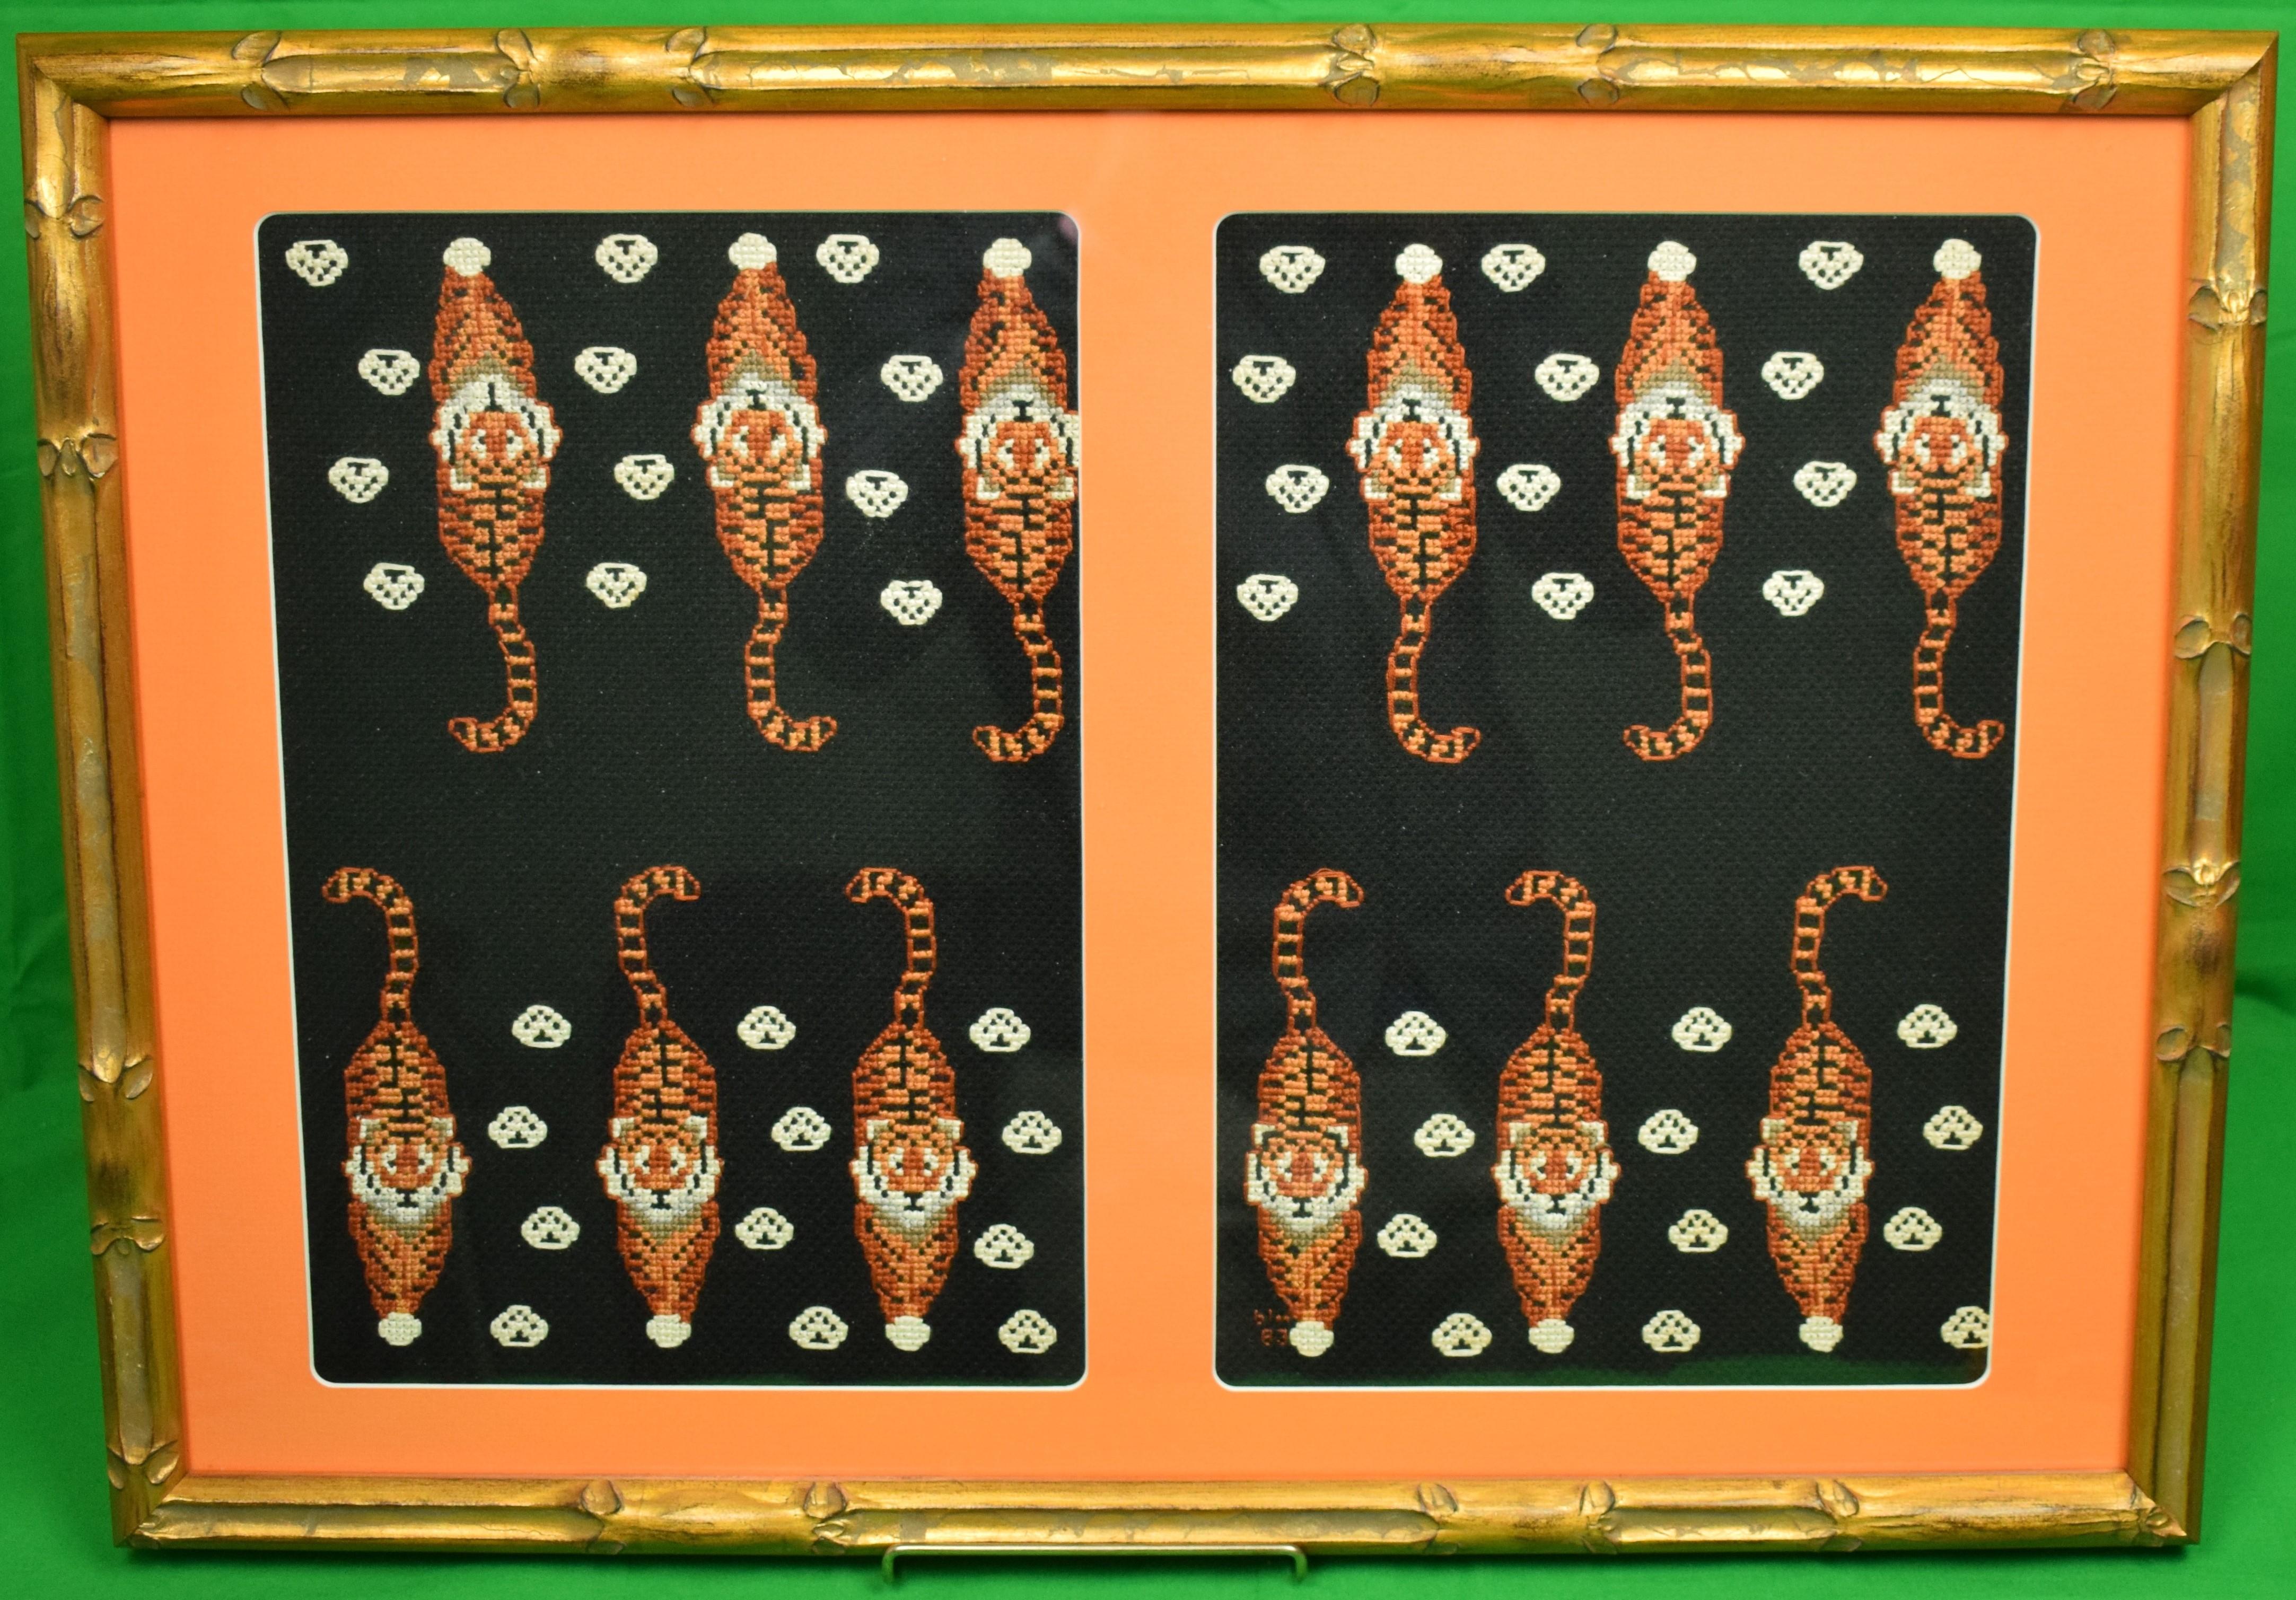 "Princeton Tigers Hand-Needlepoint Backgammon Board" - Art by Unknown